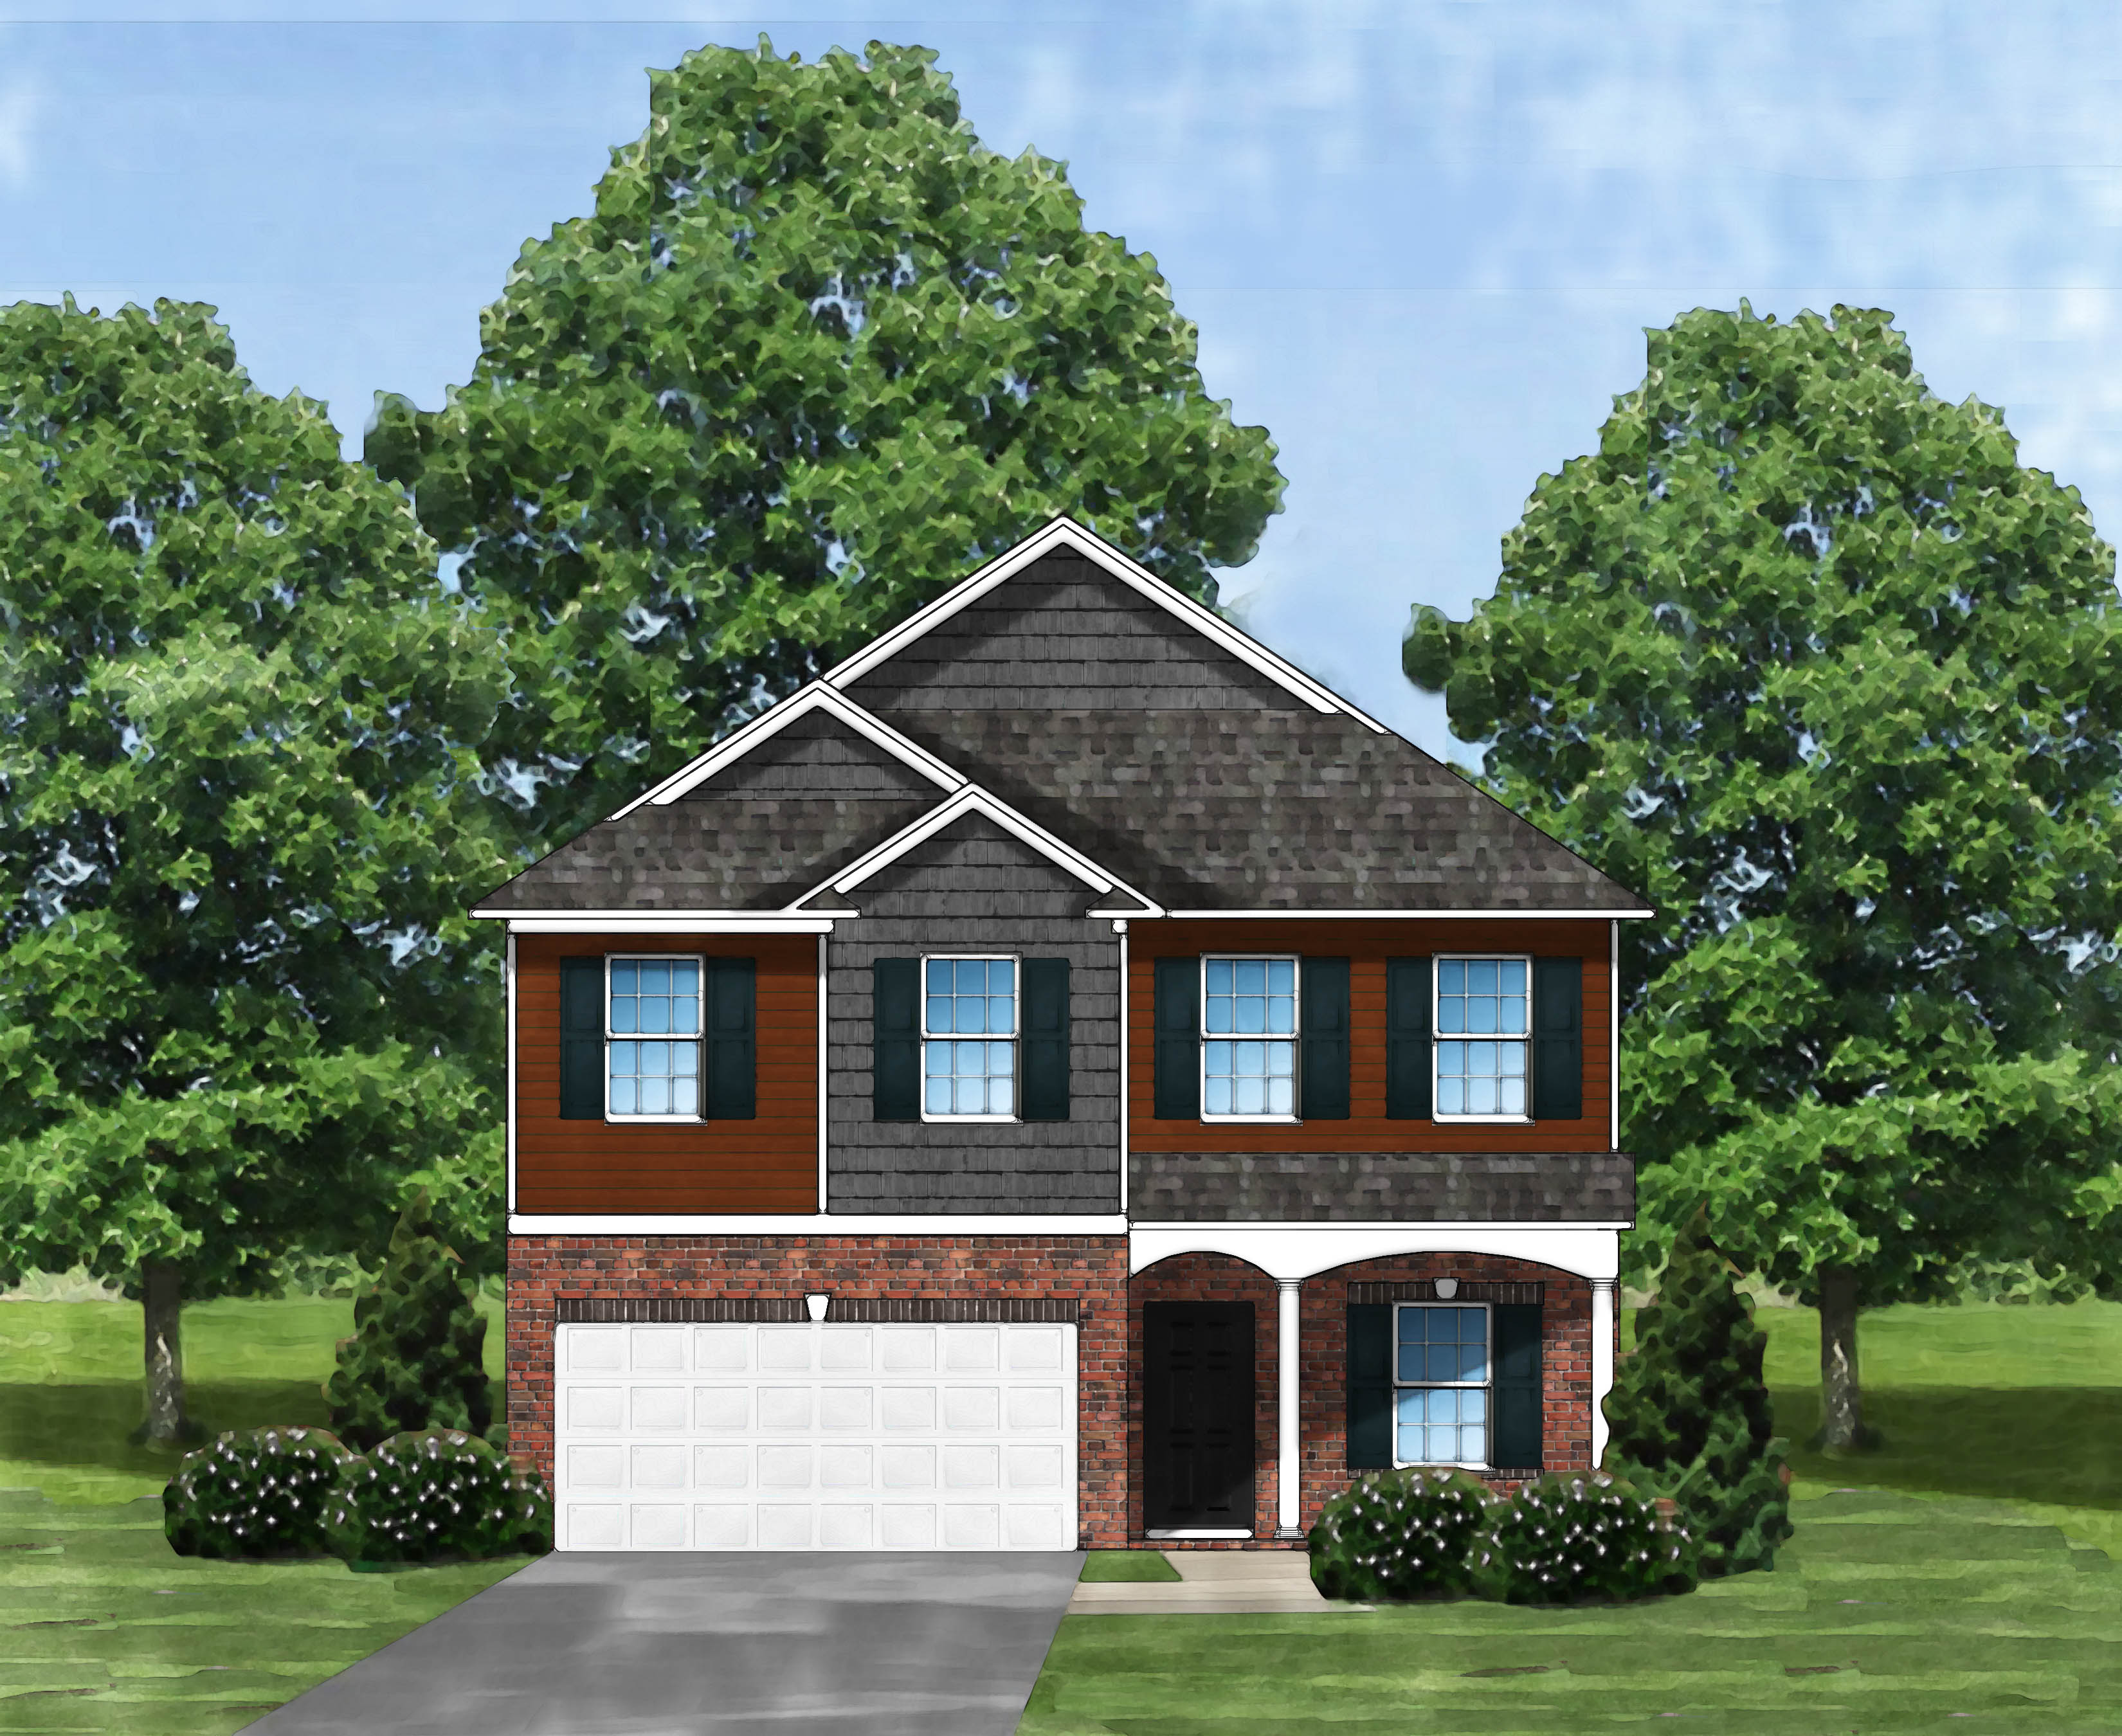 Kingstree II B by Great Southern Homes